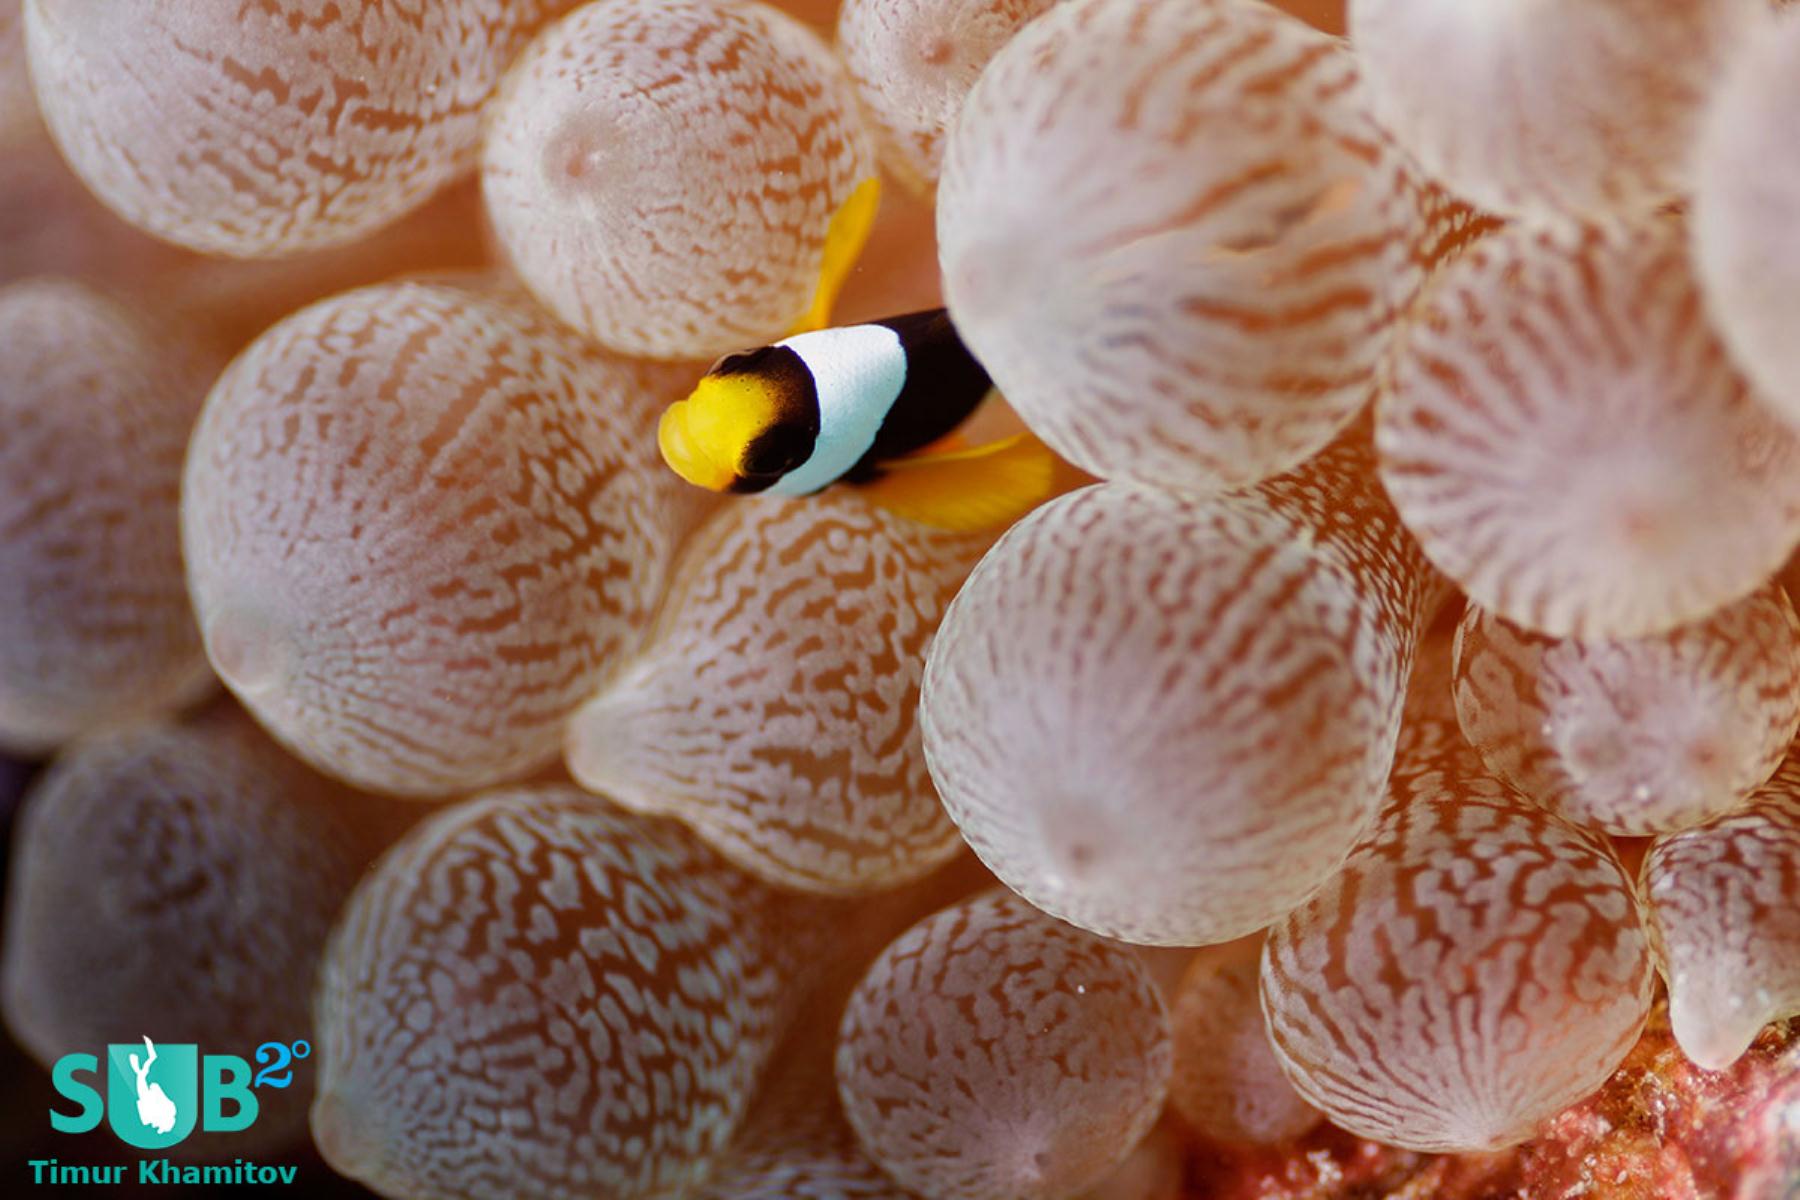 Cute little clownfish looking out at me.